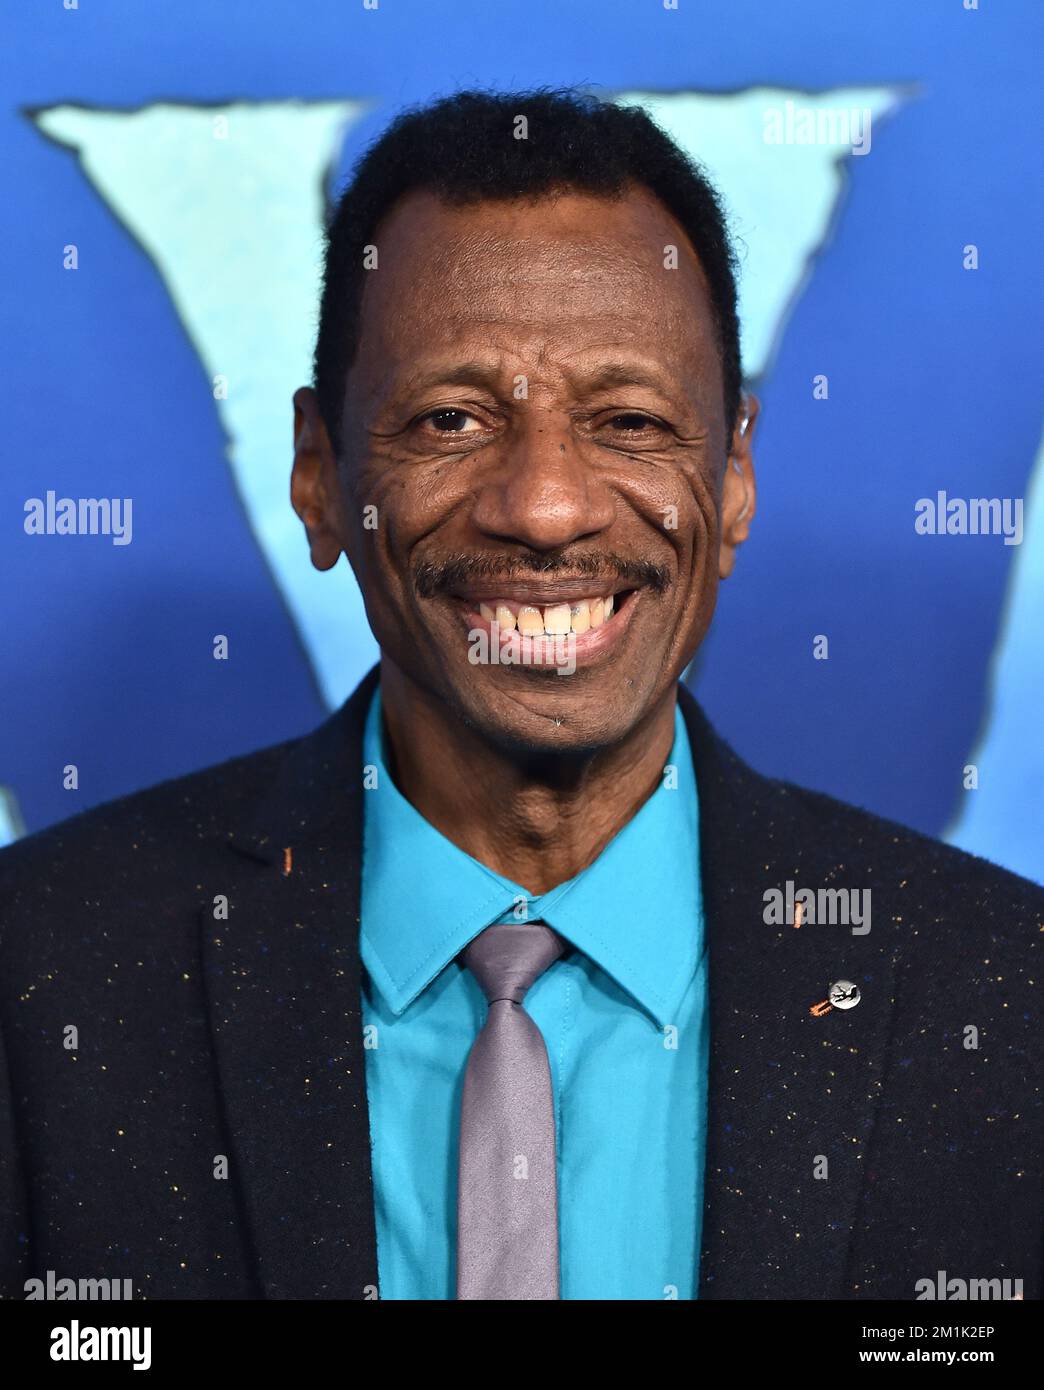 Hollywood, CA on December 12, 2022. CJ Jones arriving to the U.S. premiere of 20th Century Studios’ “Avatar: The Way of Water”   held at the Dolby Theatre in Hollywood, CA on December 12, 2022. © Lisa OConnor / AFF-USA.com Stock Photo